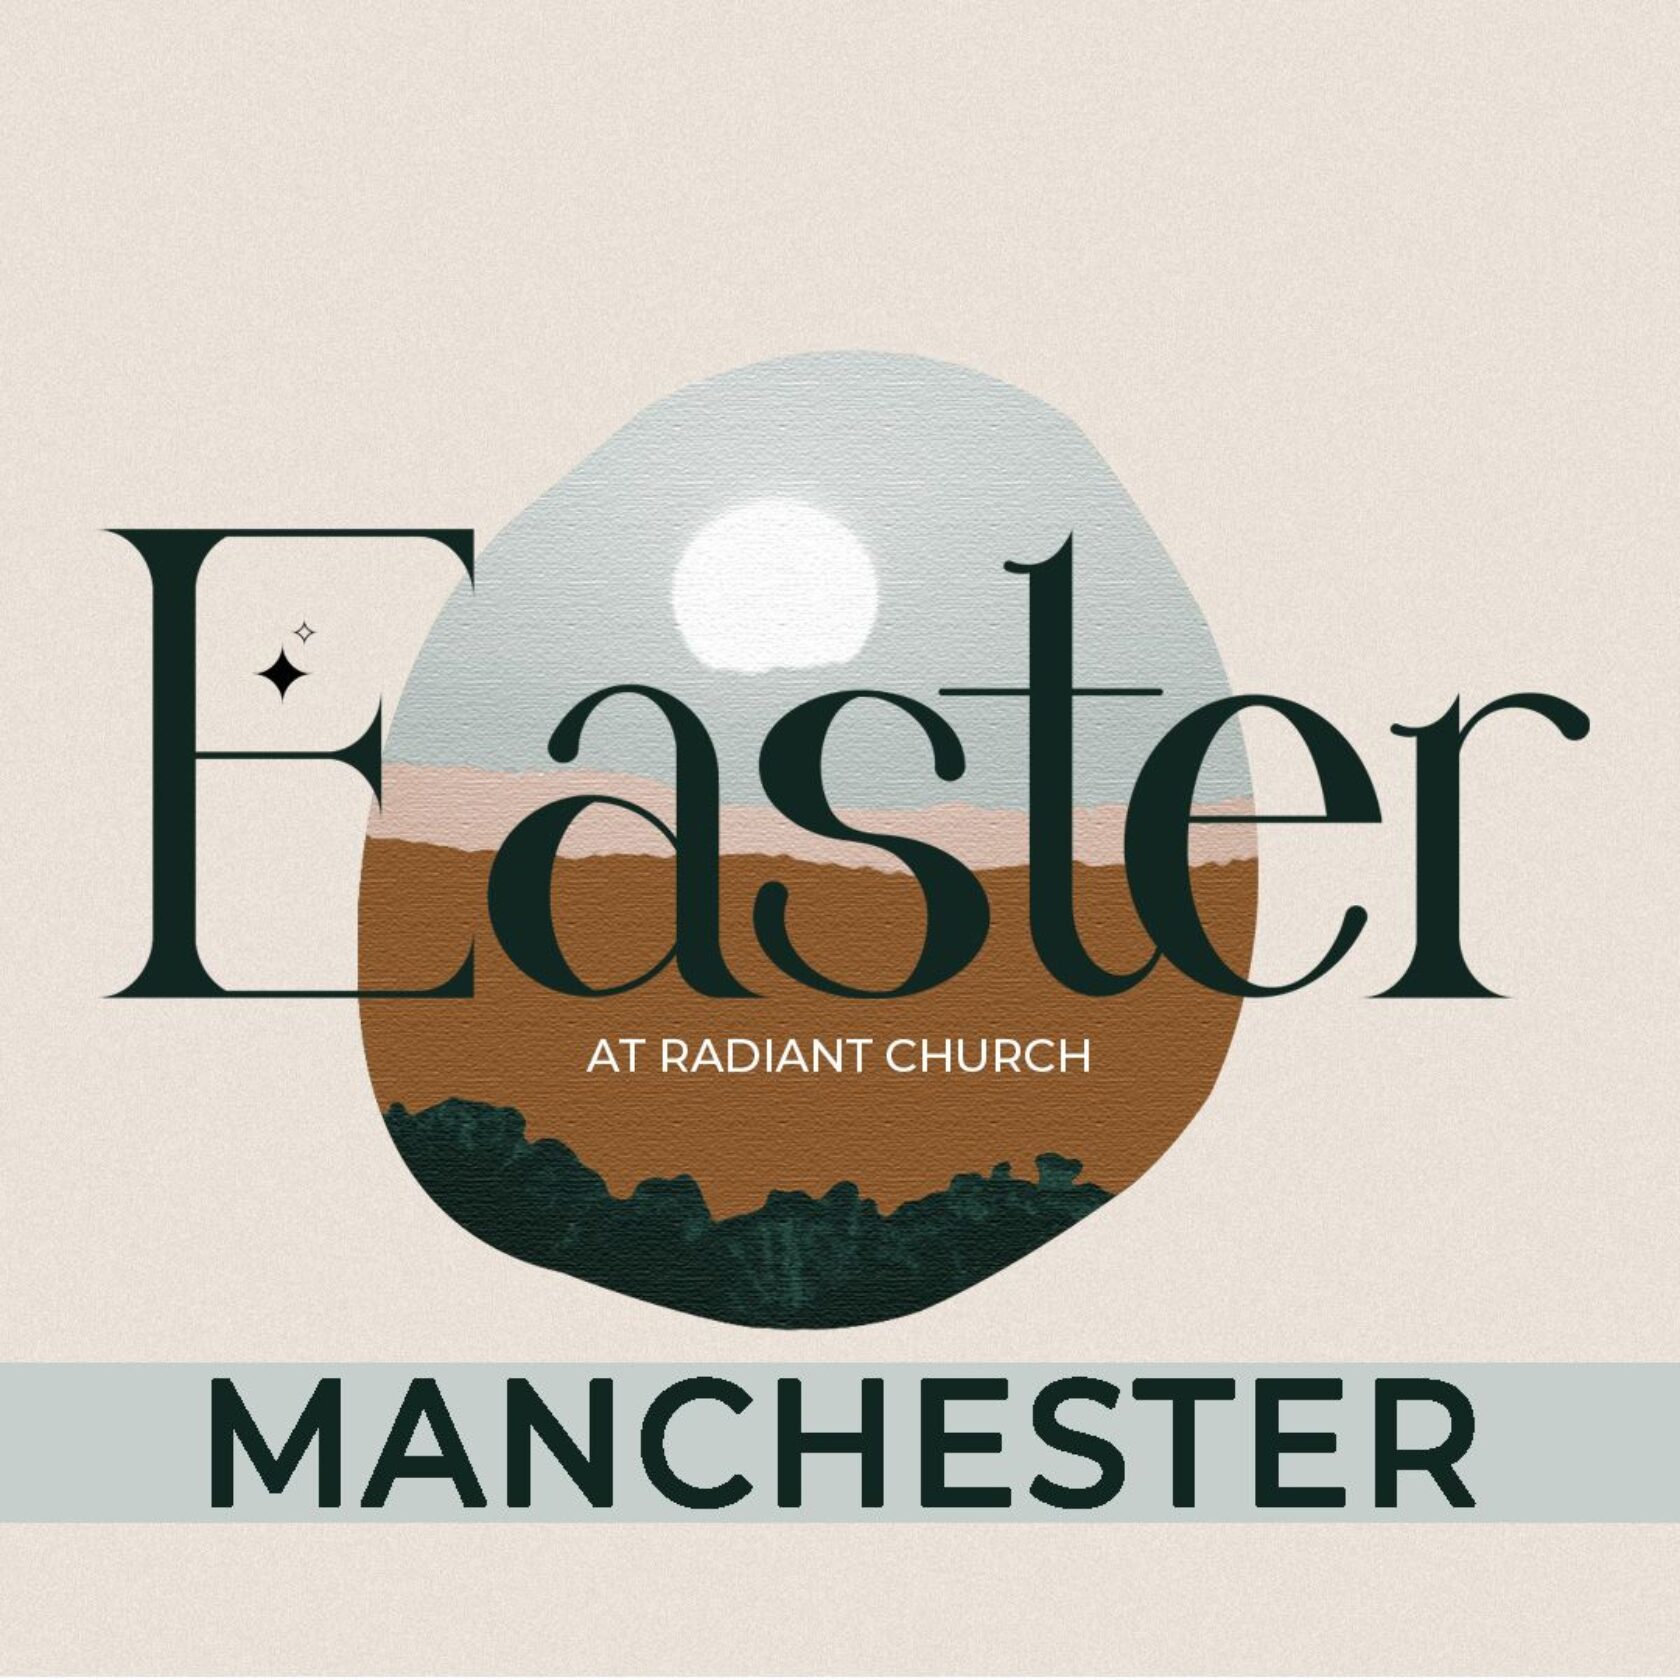 Easter at Radiant Church | MANCHESTER